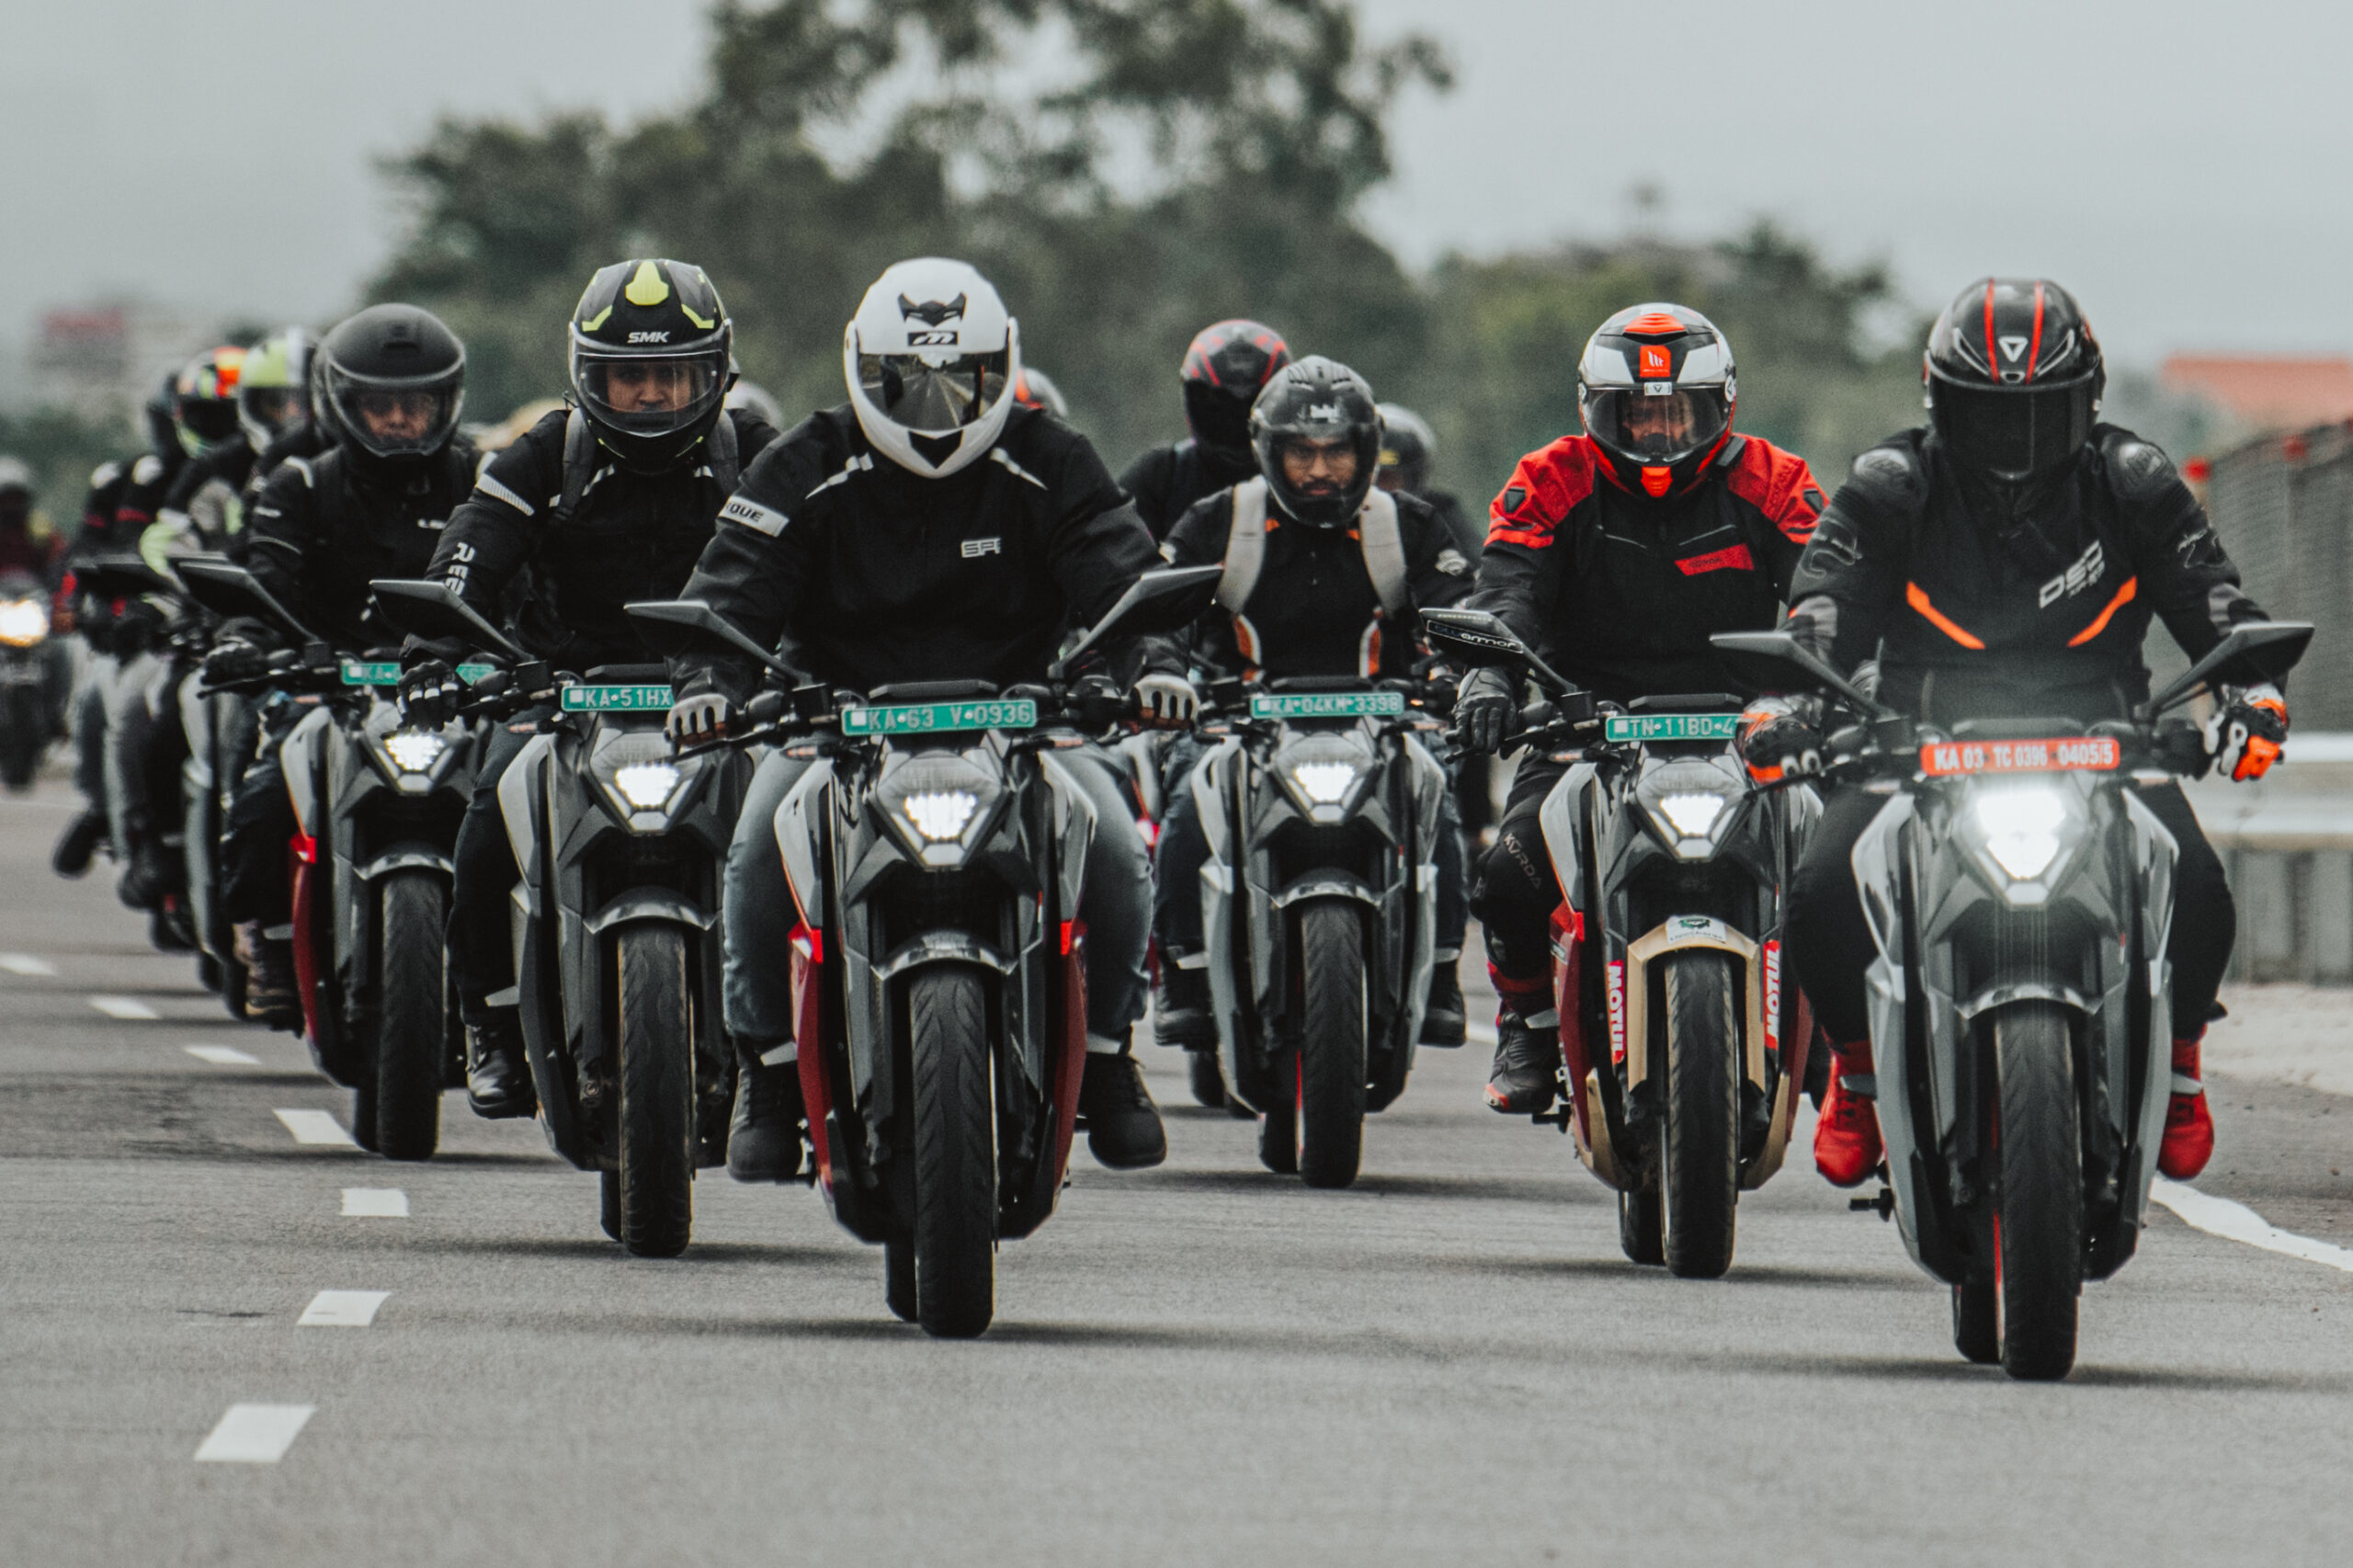 Ultraviolette Launches Riding Community Called The UV Squadron